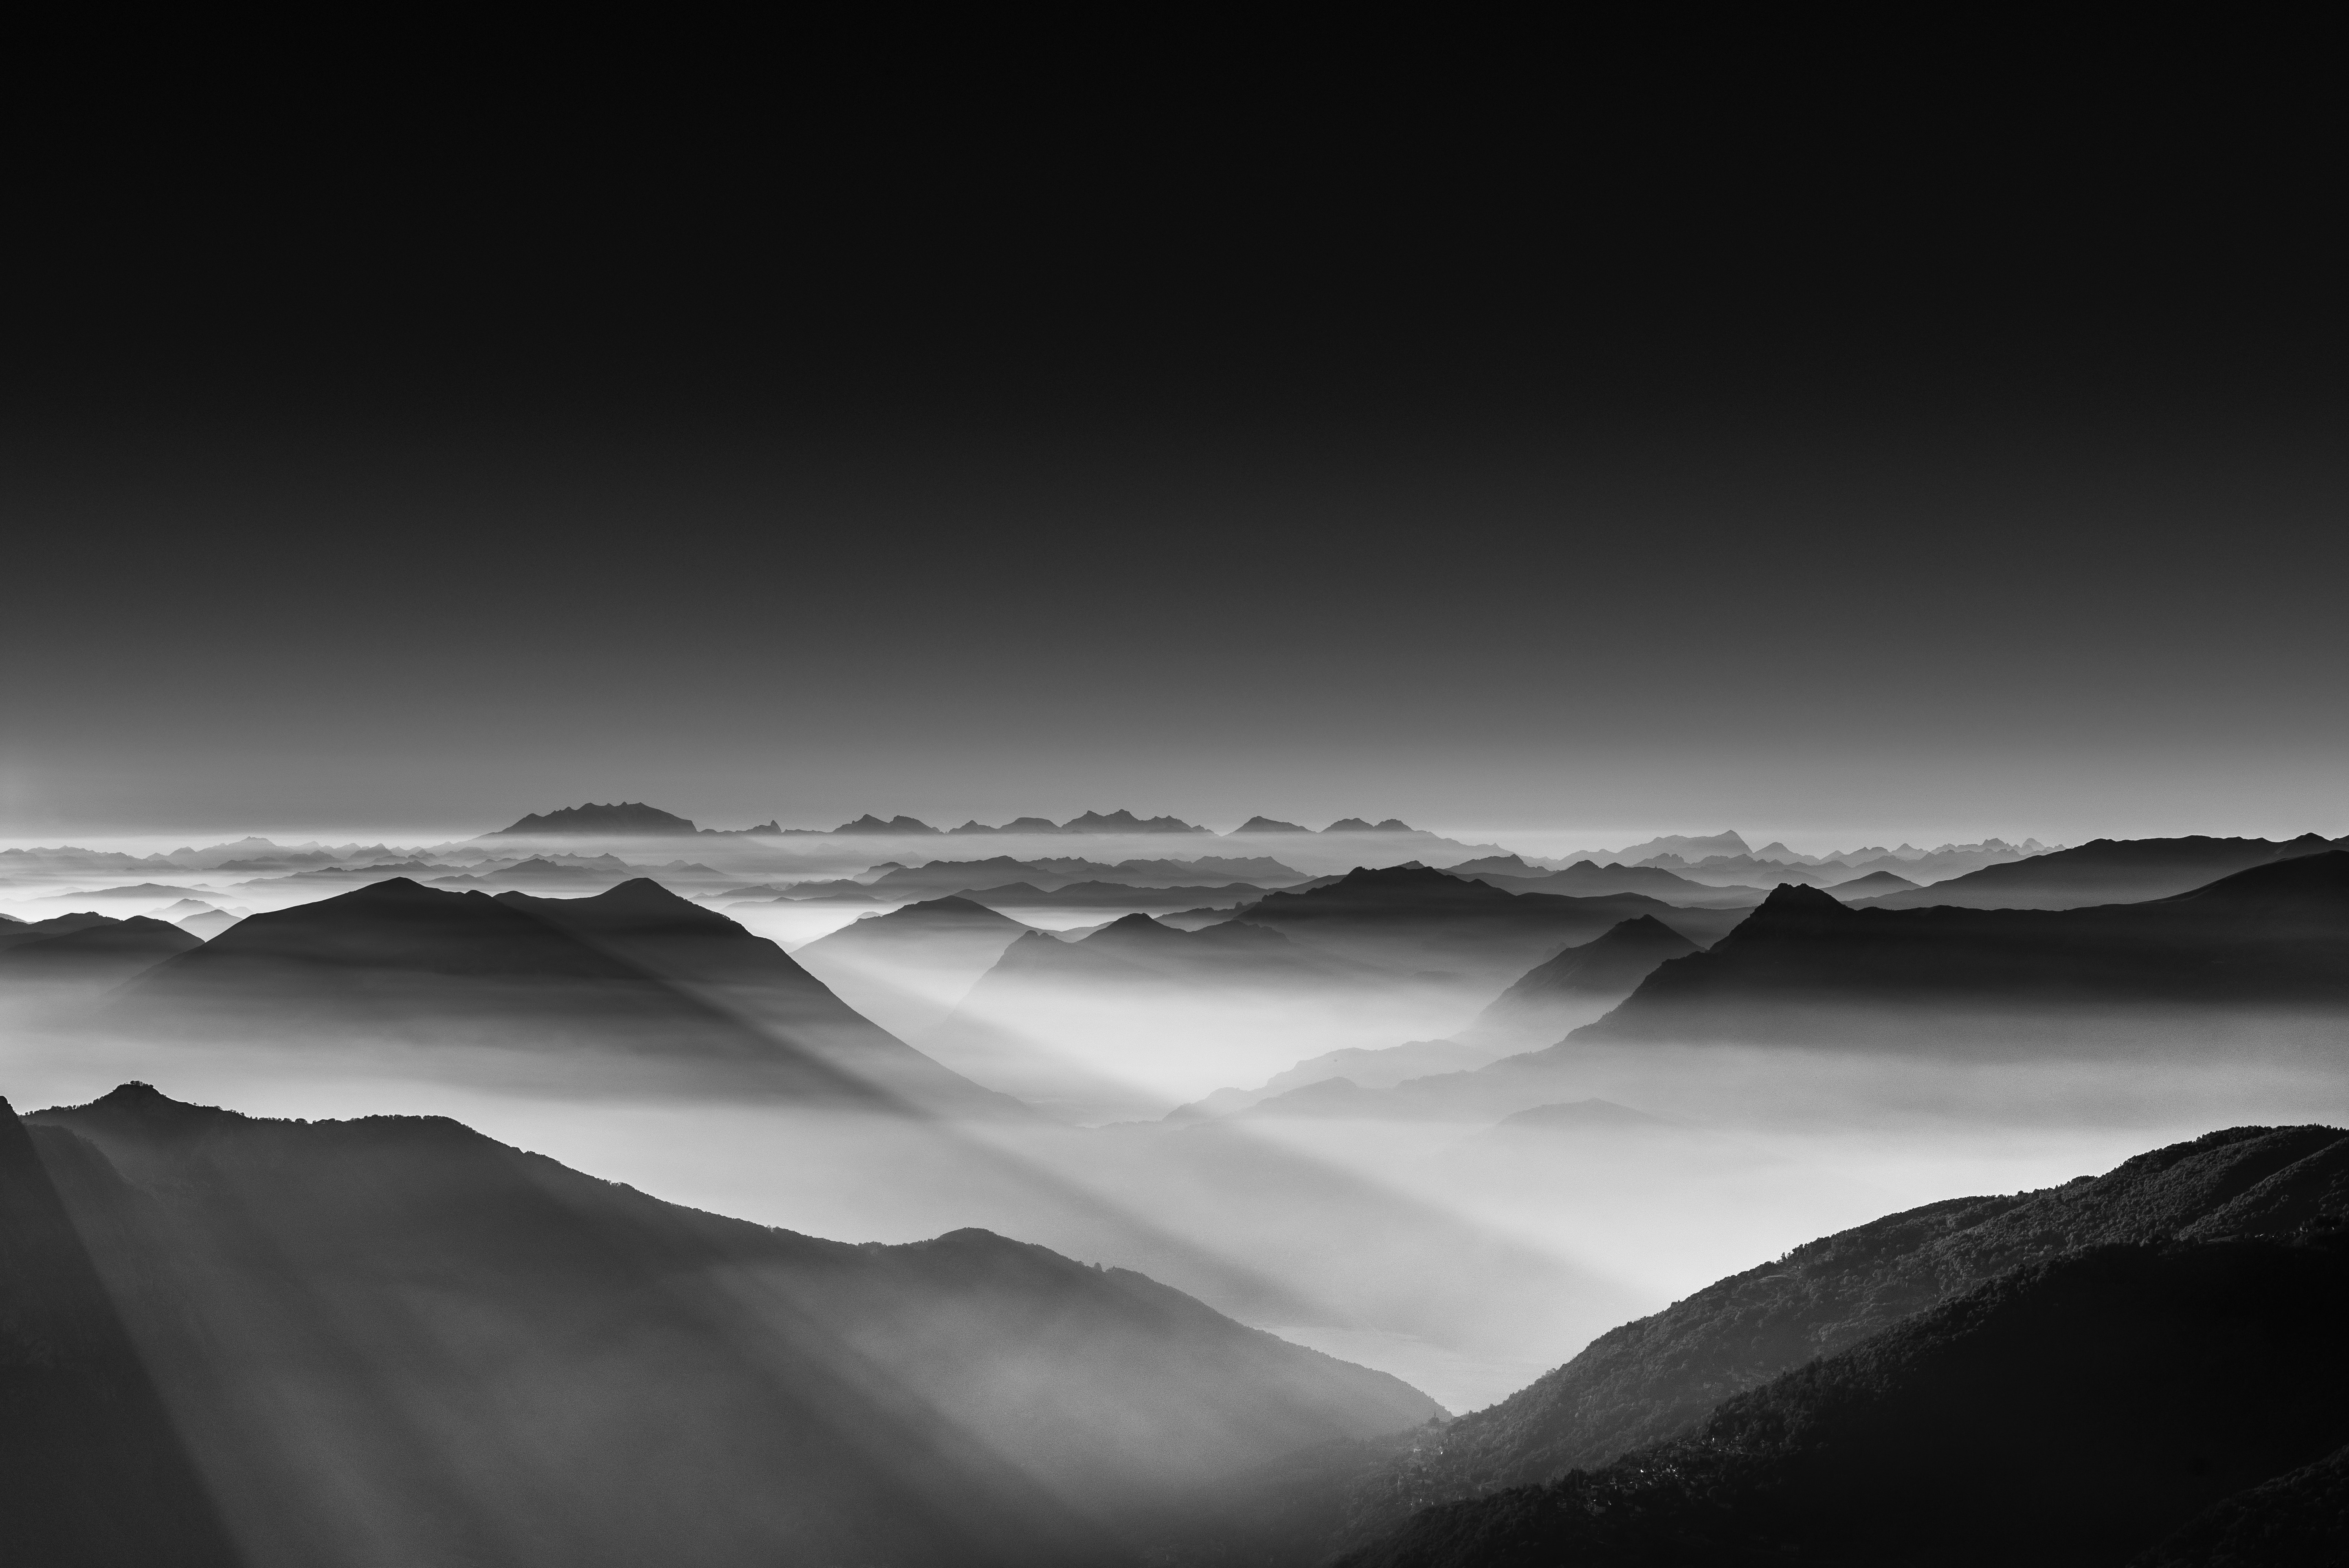 A black and white photo of the mountains from above